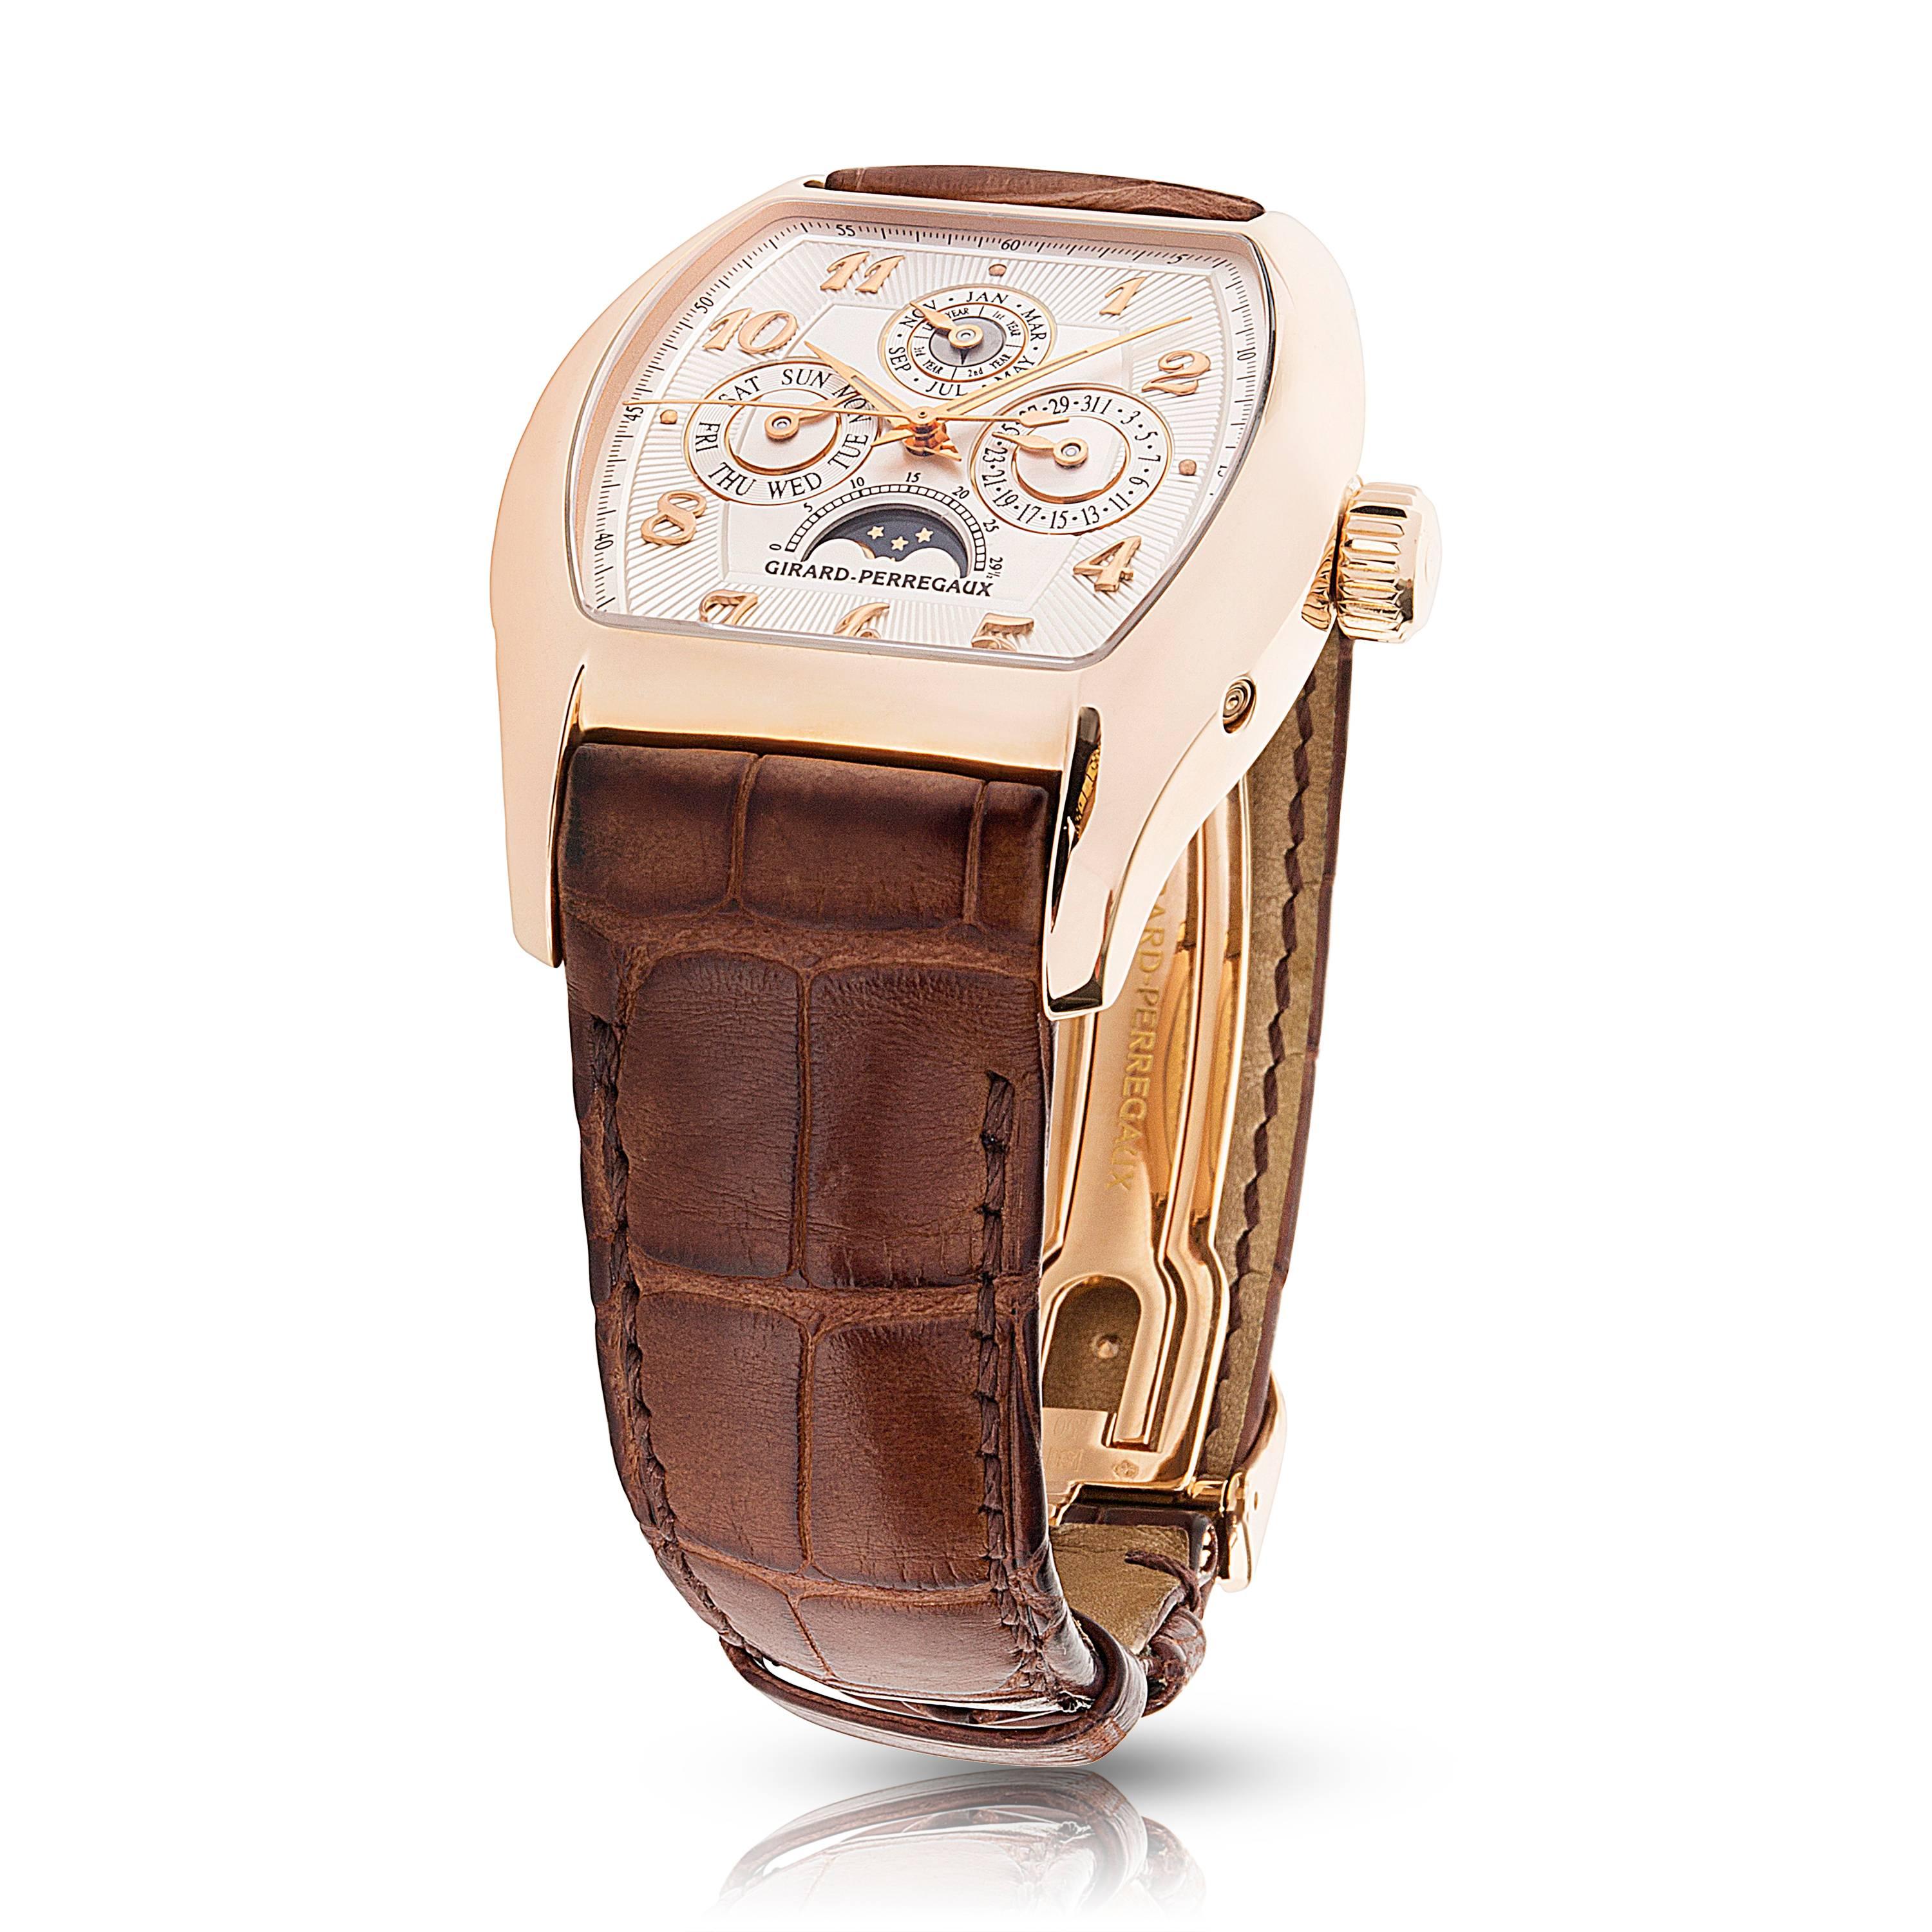 
Girard-Perregaux Richeville 2722 Men's Watch in 18K Rose Gold

PRIMARY DETAILS
Brand:  Girard Perregaux
Model: Richiville
Serial Number: ***
Country of Origin: Switzerland
Movement Type: Mechanical: Automatic/Kinetic
Refurbished Notes: Overhaul,